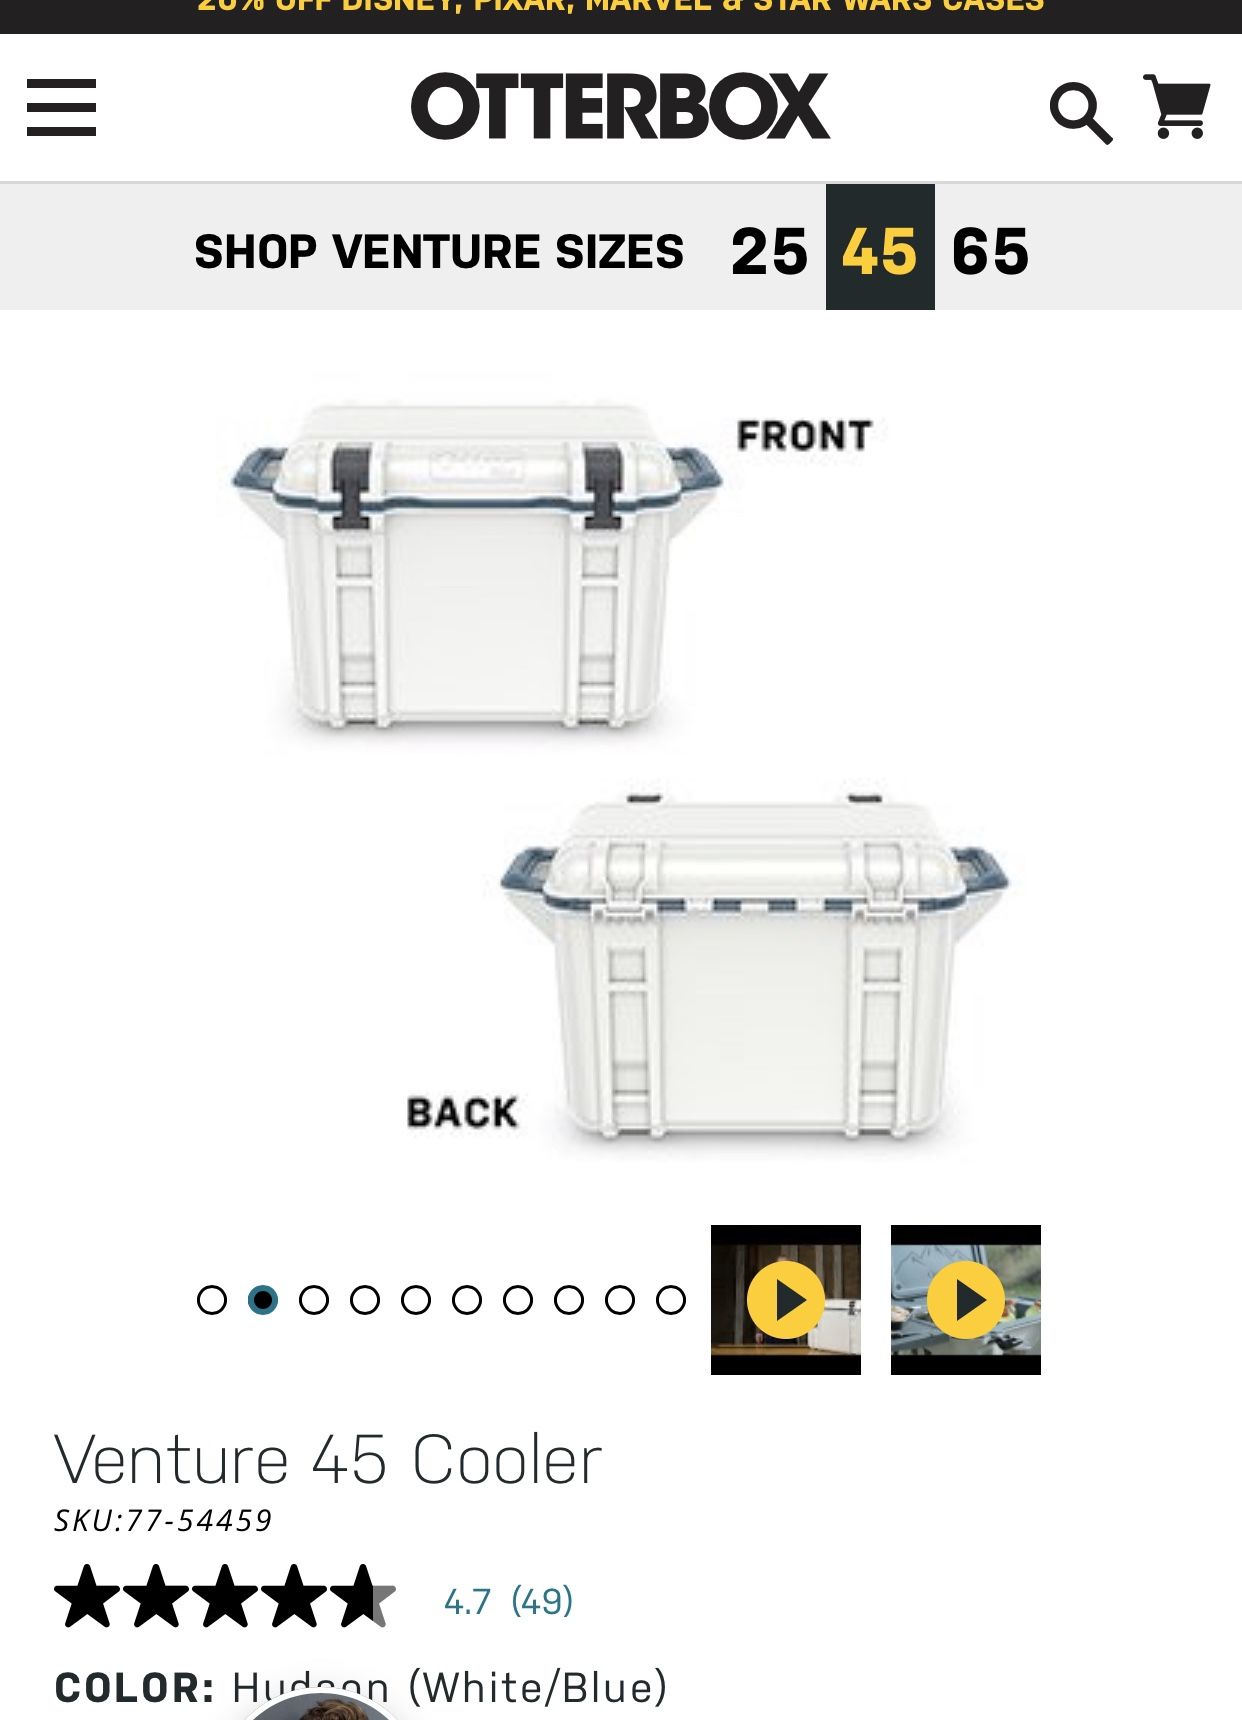 Otterbox venture 45 cooler with many attachments pictured